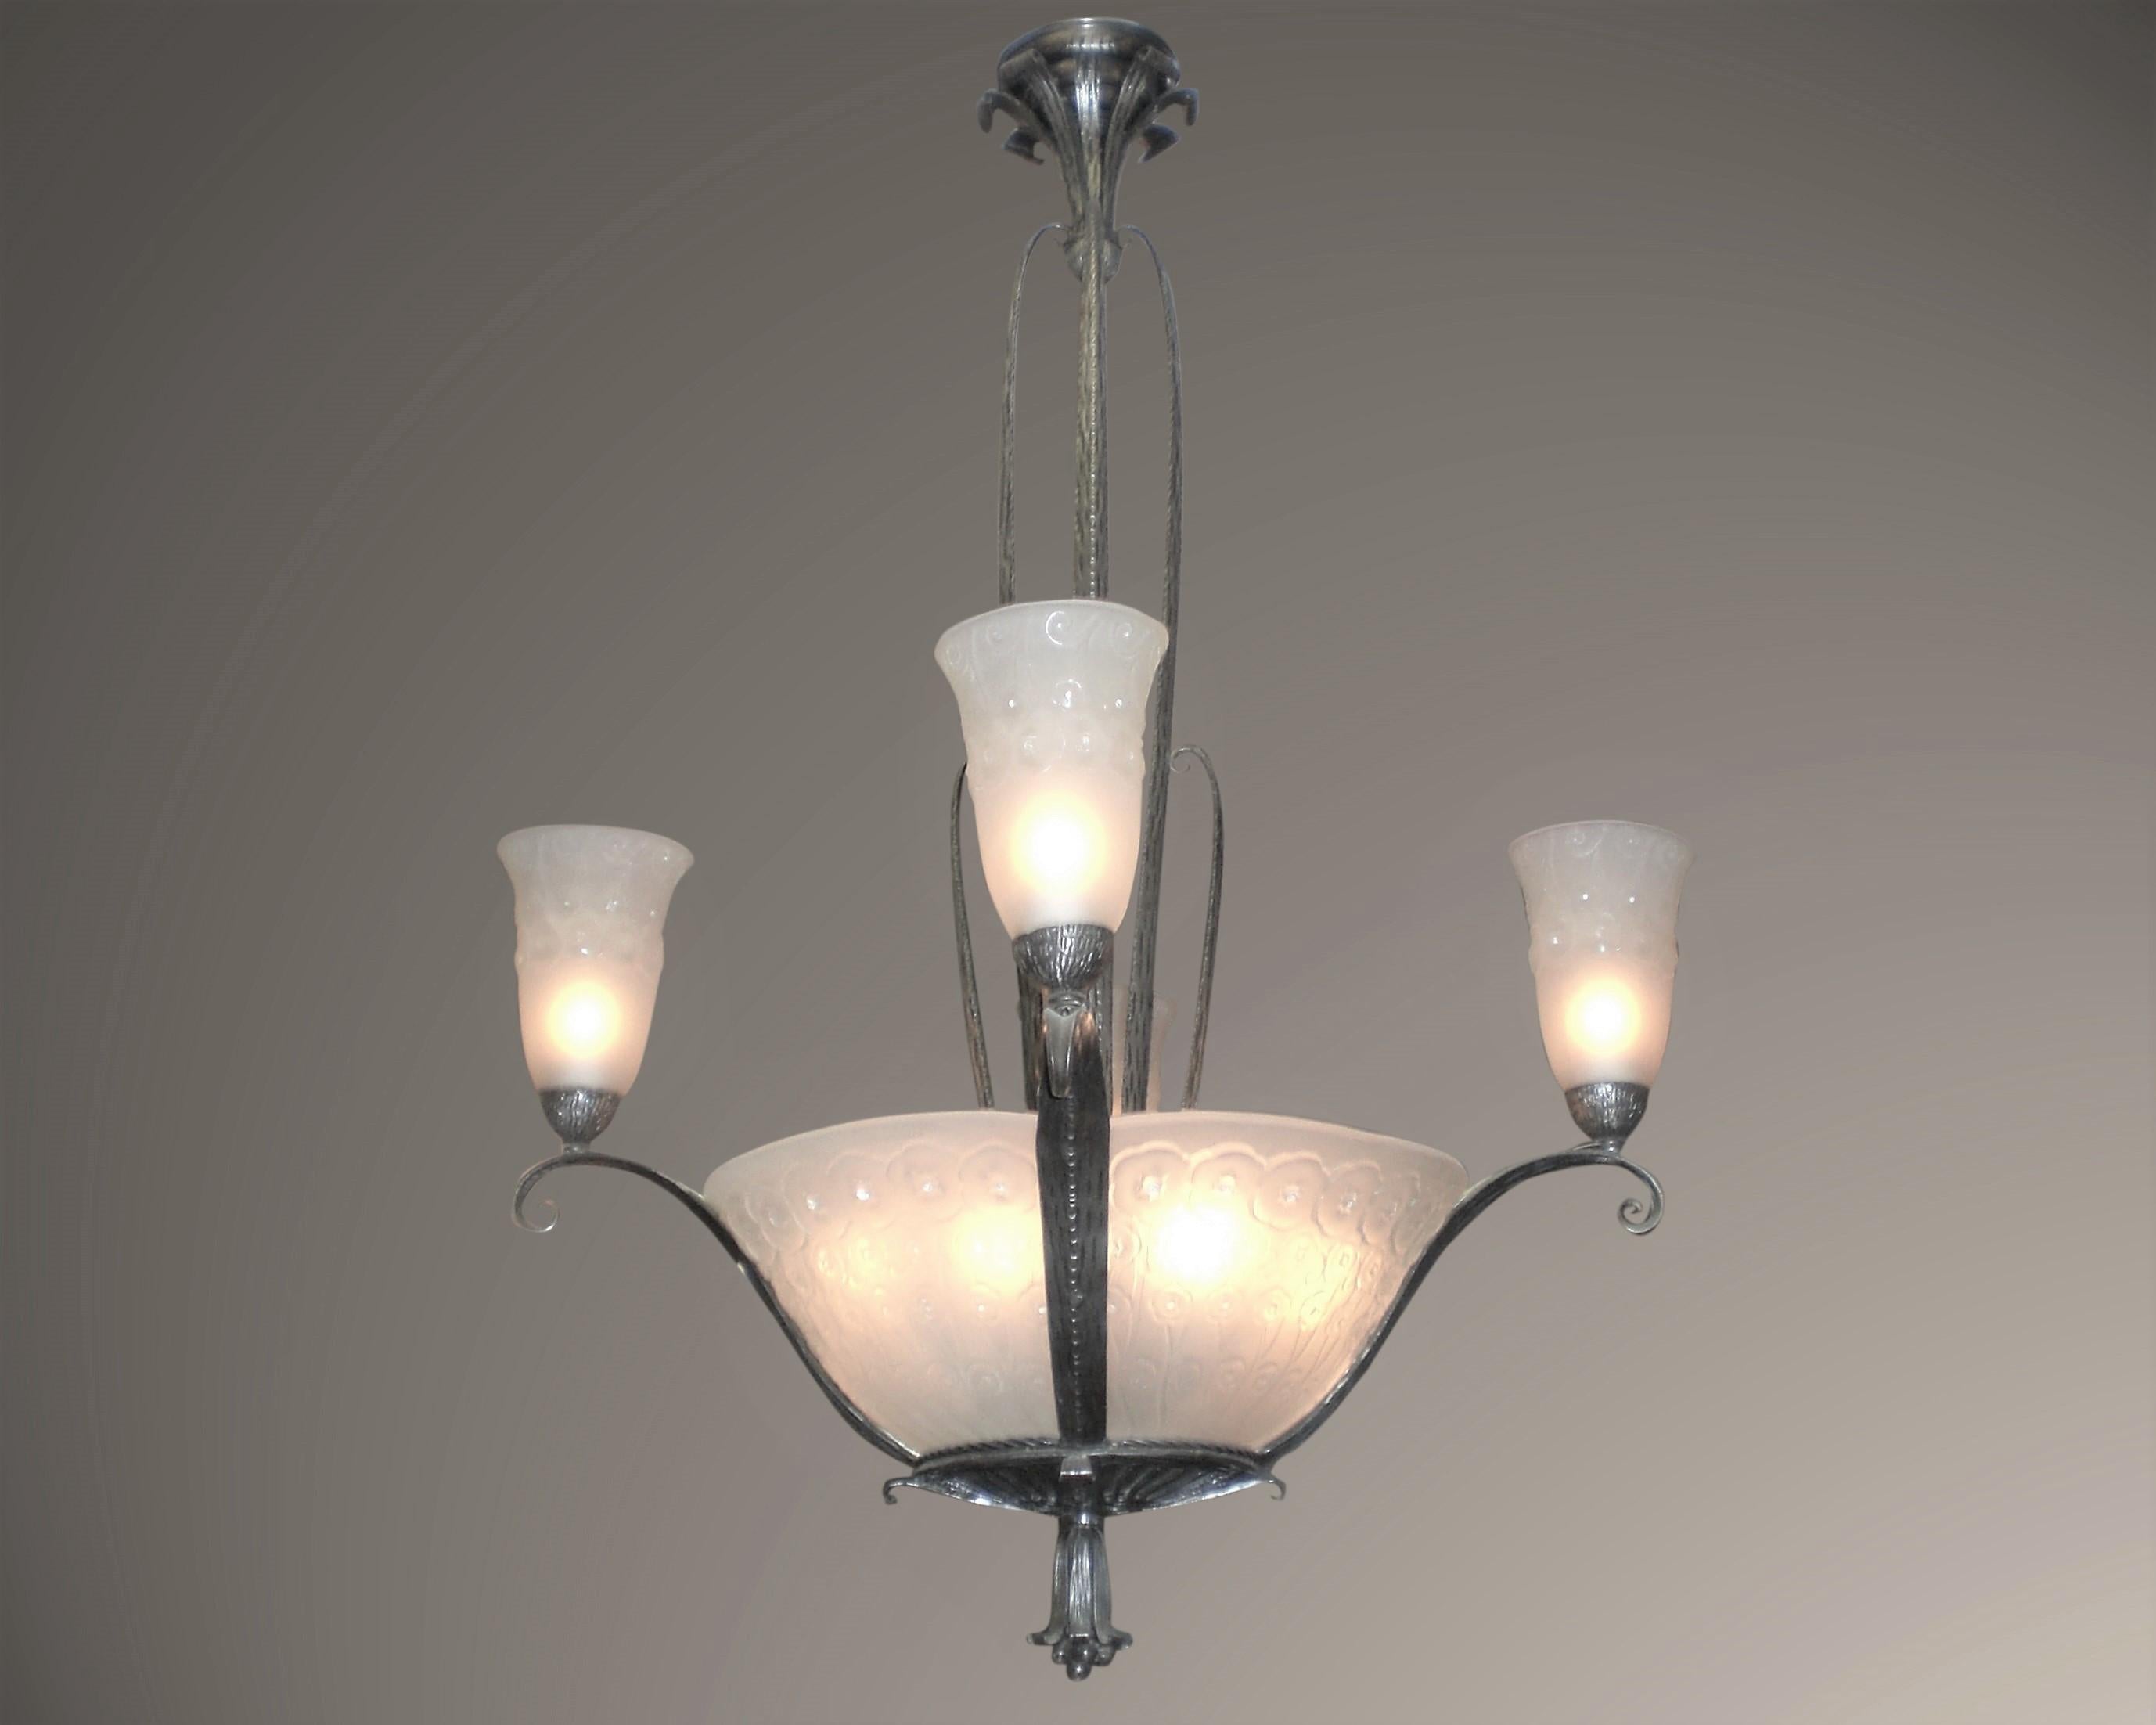 Fine and elegant French Art Deco chandelier. Four panels and four matching tulips mounted in the original hand-hammered iron armature with tiered waterfall scroll stem and delicate mount ending in a blossoming tulip finial. The frosted art glass